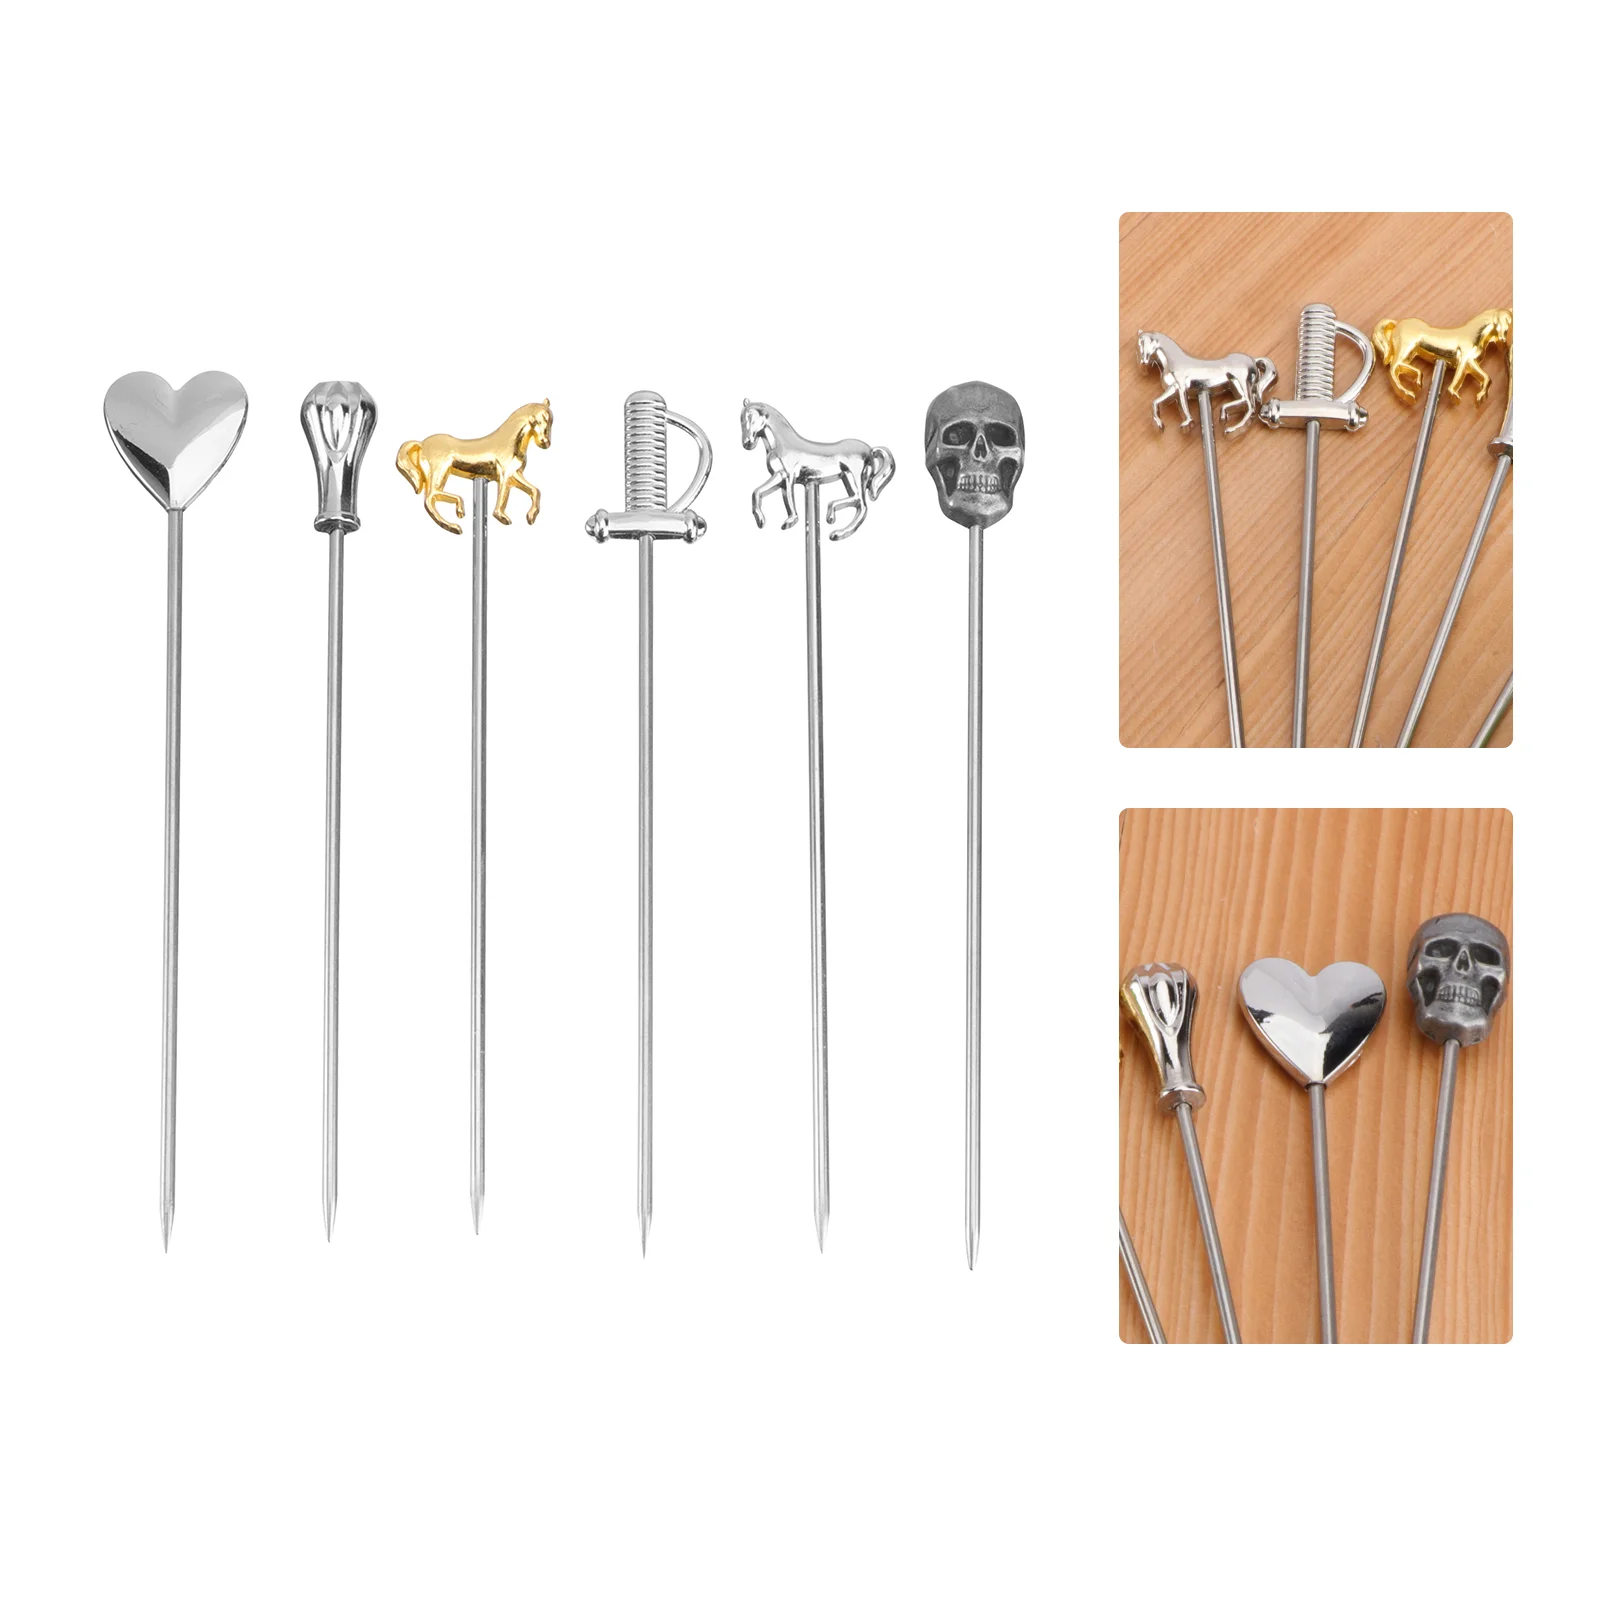 

Cocktail Skewers Picks Garnish Mary Stick Drink Toothpicks Appetizer Sticks Olives Appetizers Stainless Steel Martini Set